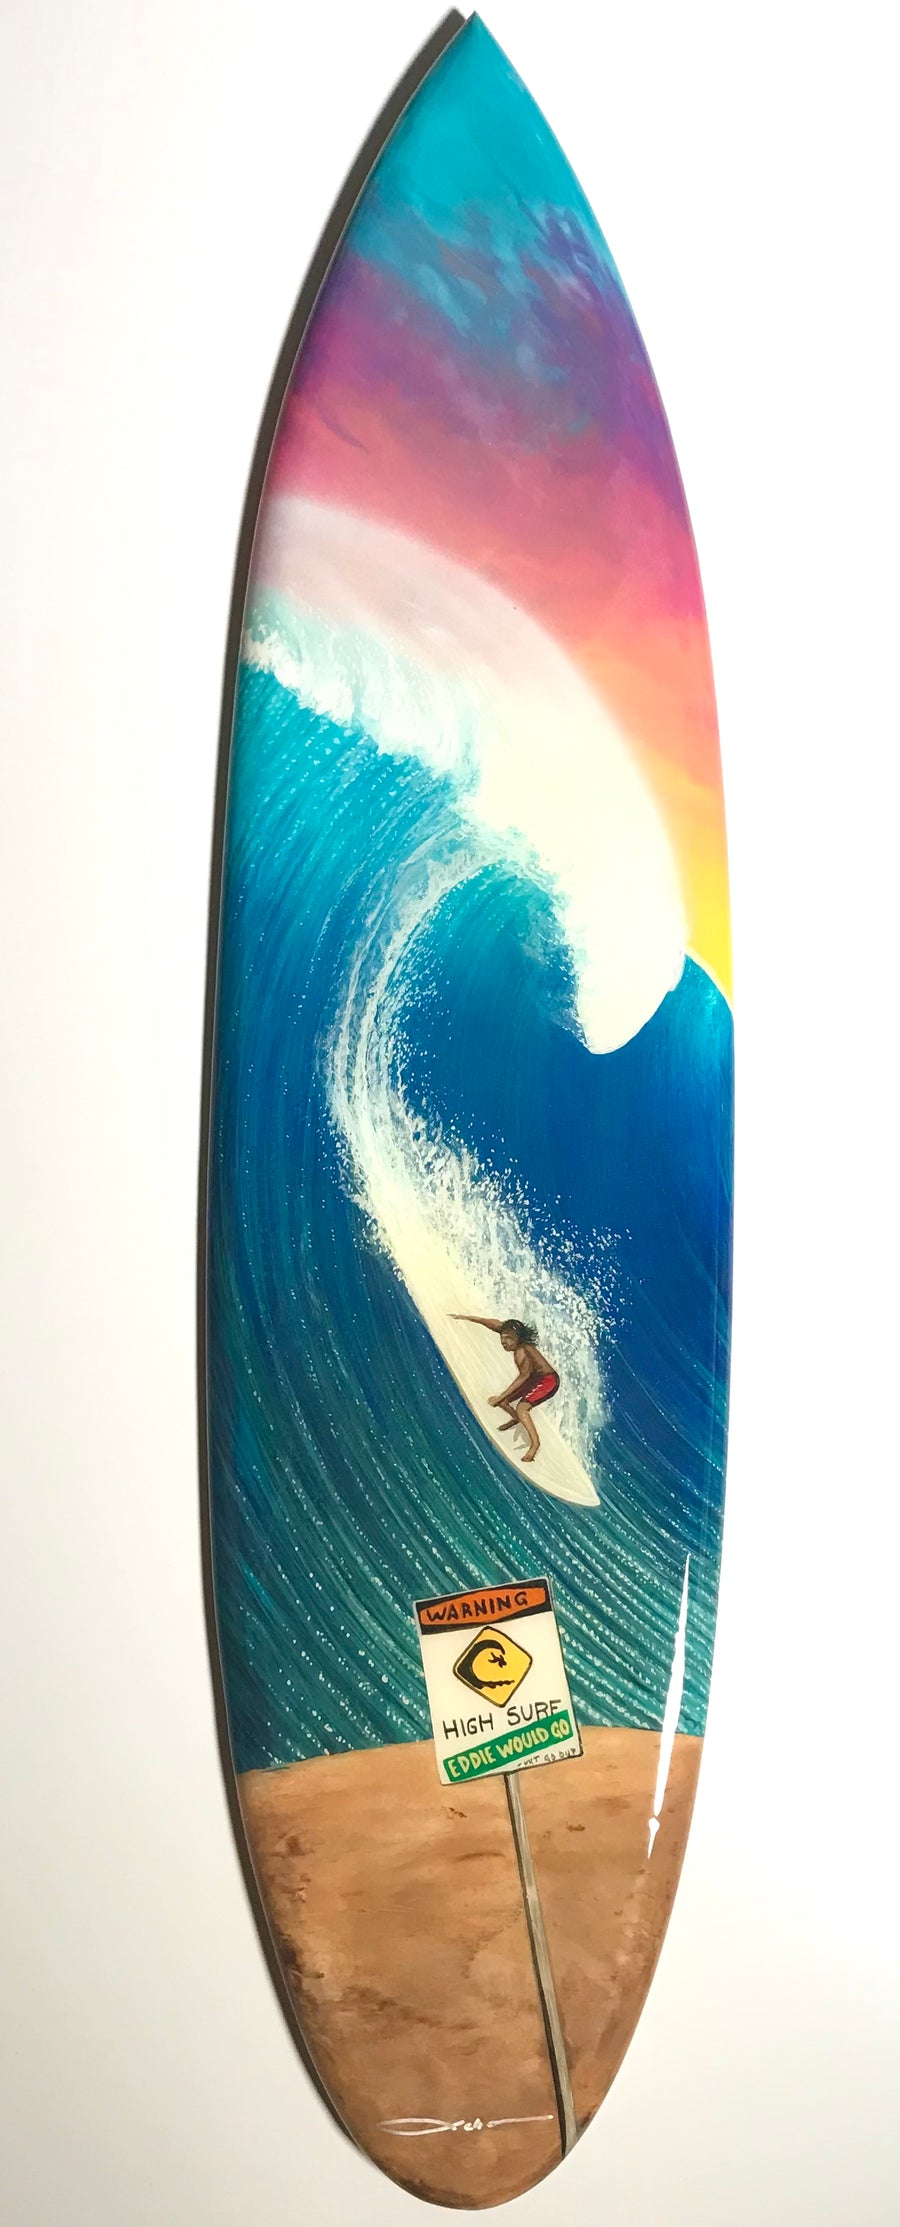 40" "Eddie Would Go”Original painting on mini Surfboard with Epoxy finish